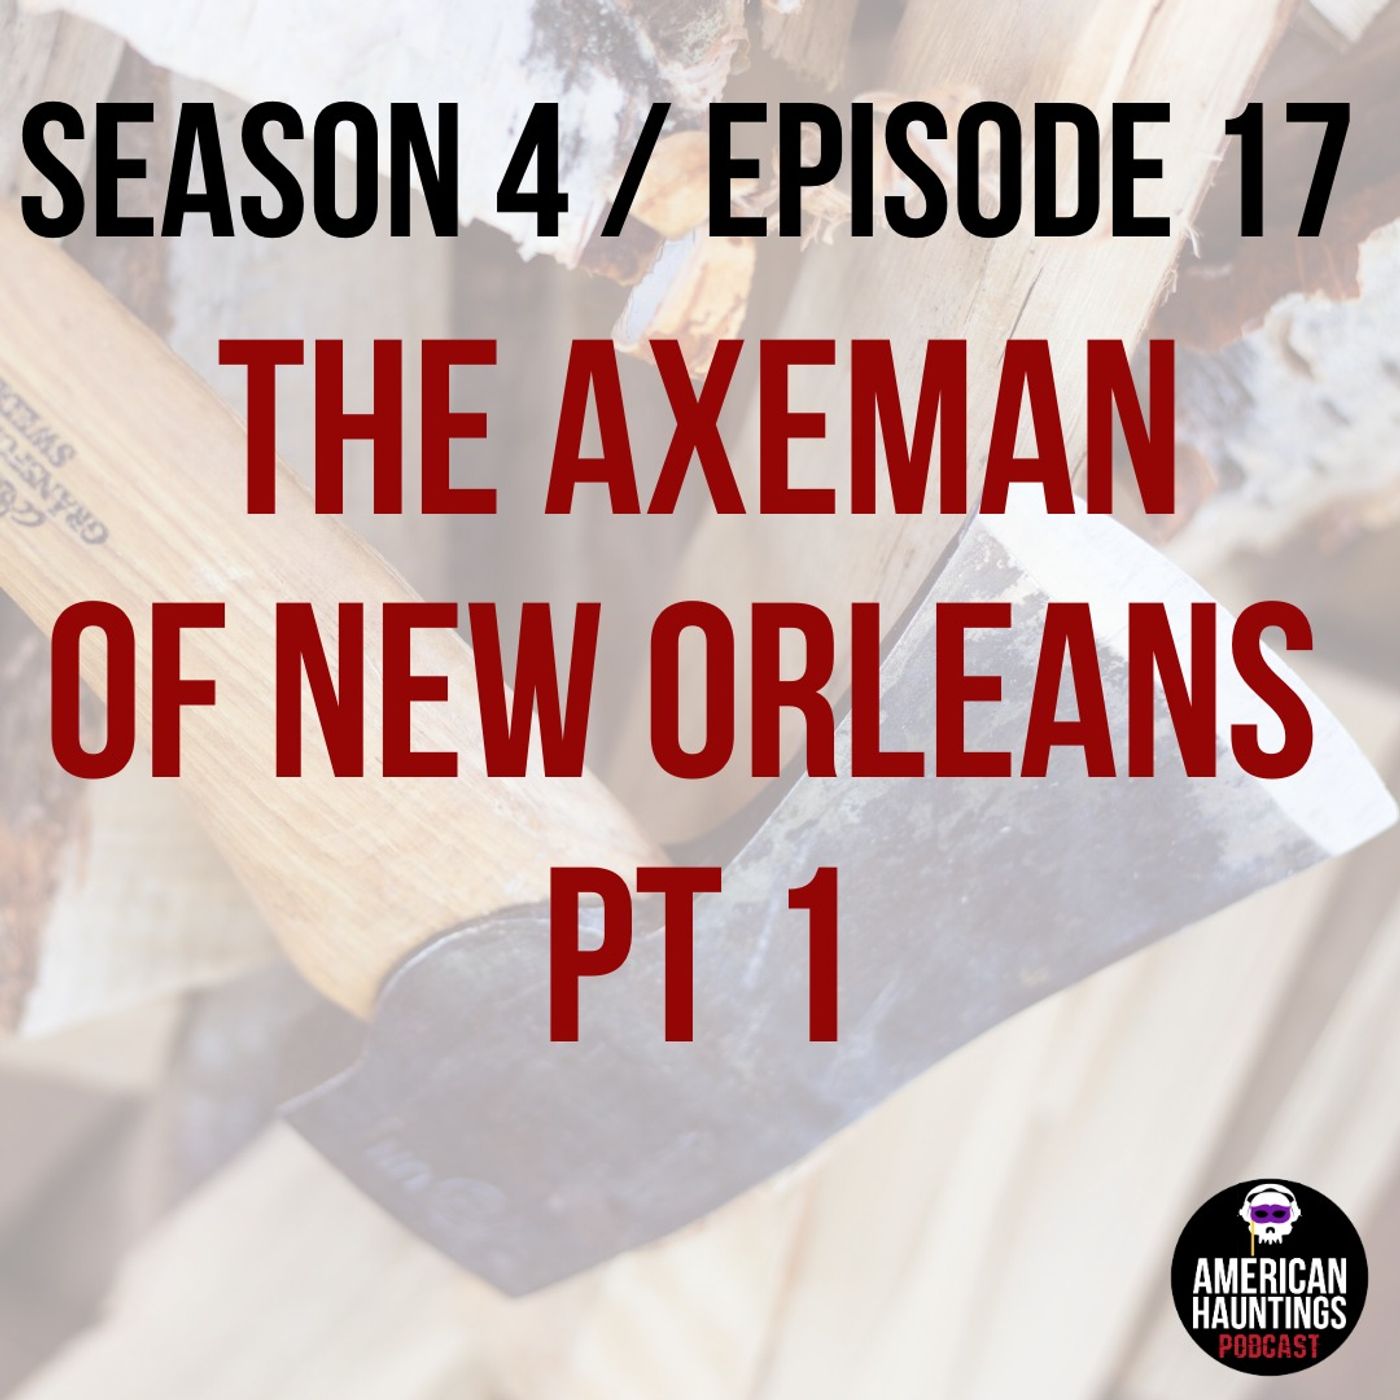 The Axeman of New Orleans pt 1